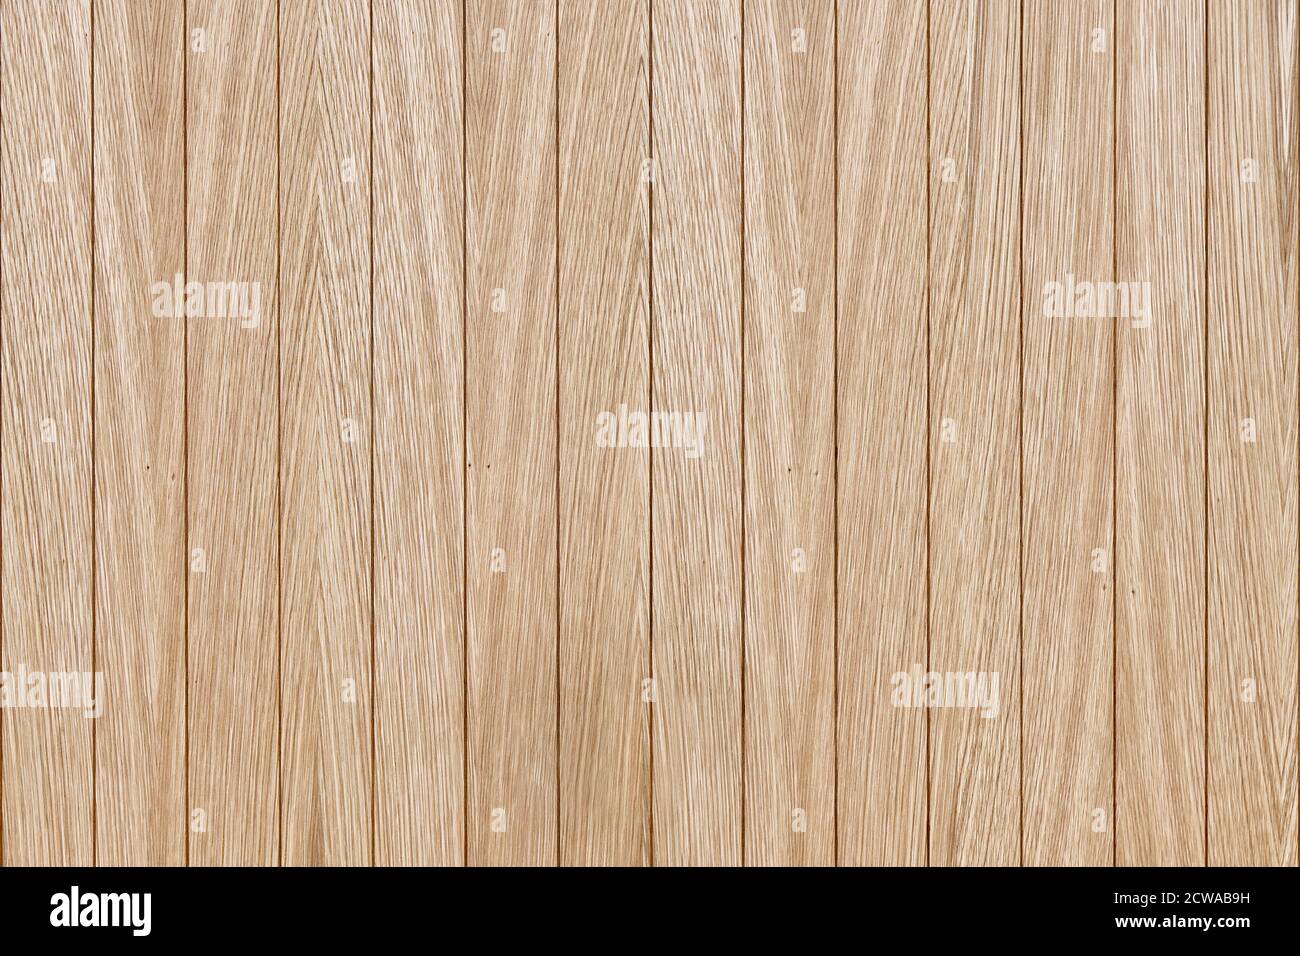 Wooden Slats Wall In Vertical Parallel Pattern Background Wood Panel Texture Stock Photo Alamy